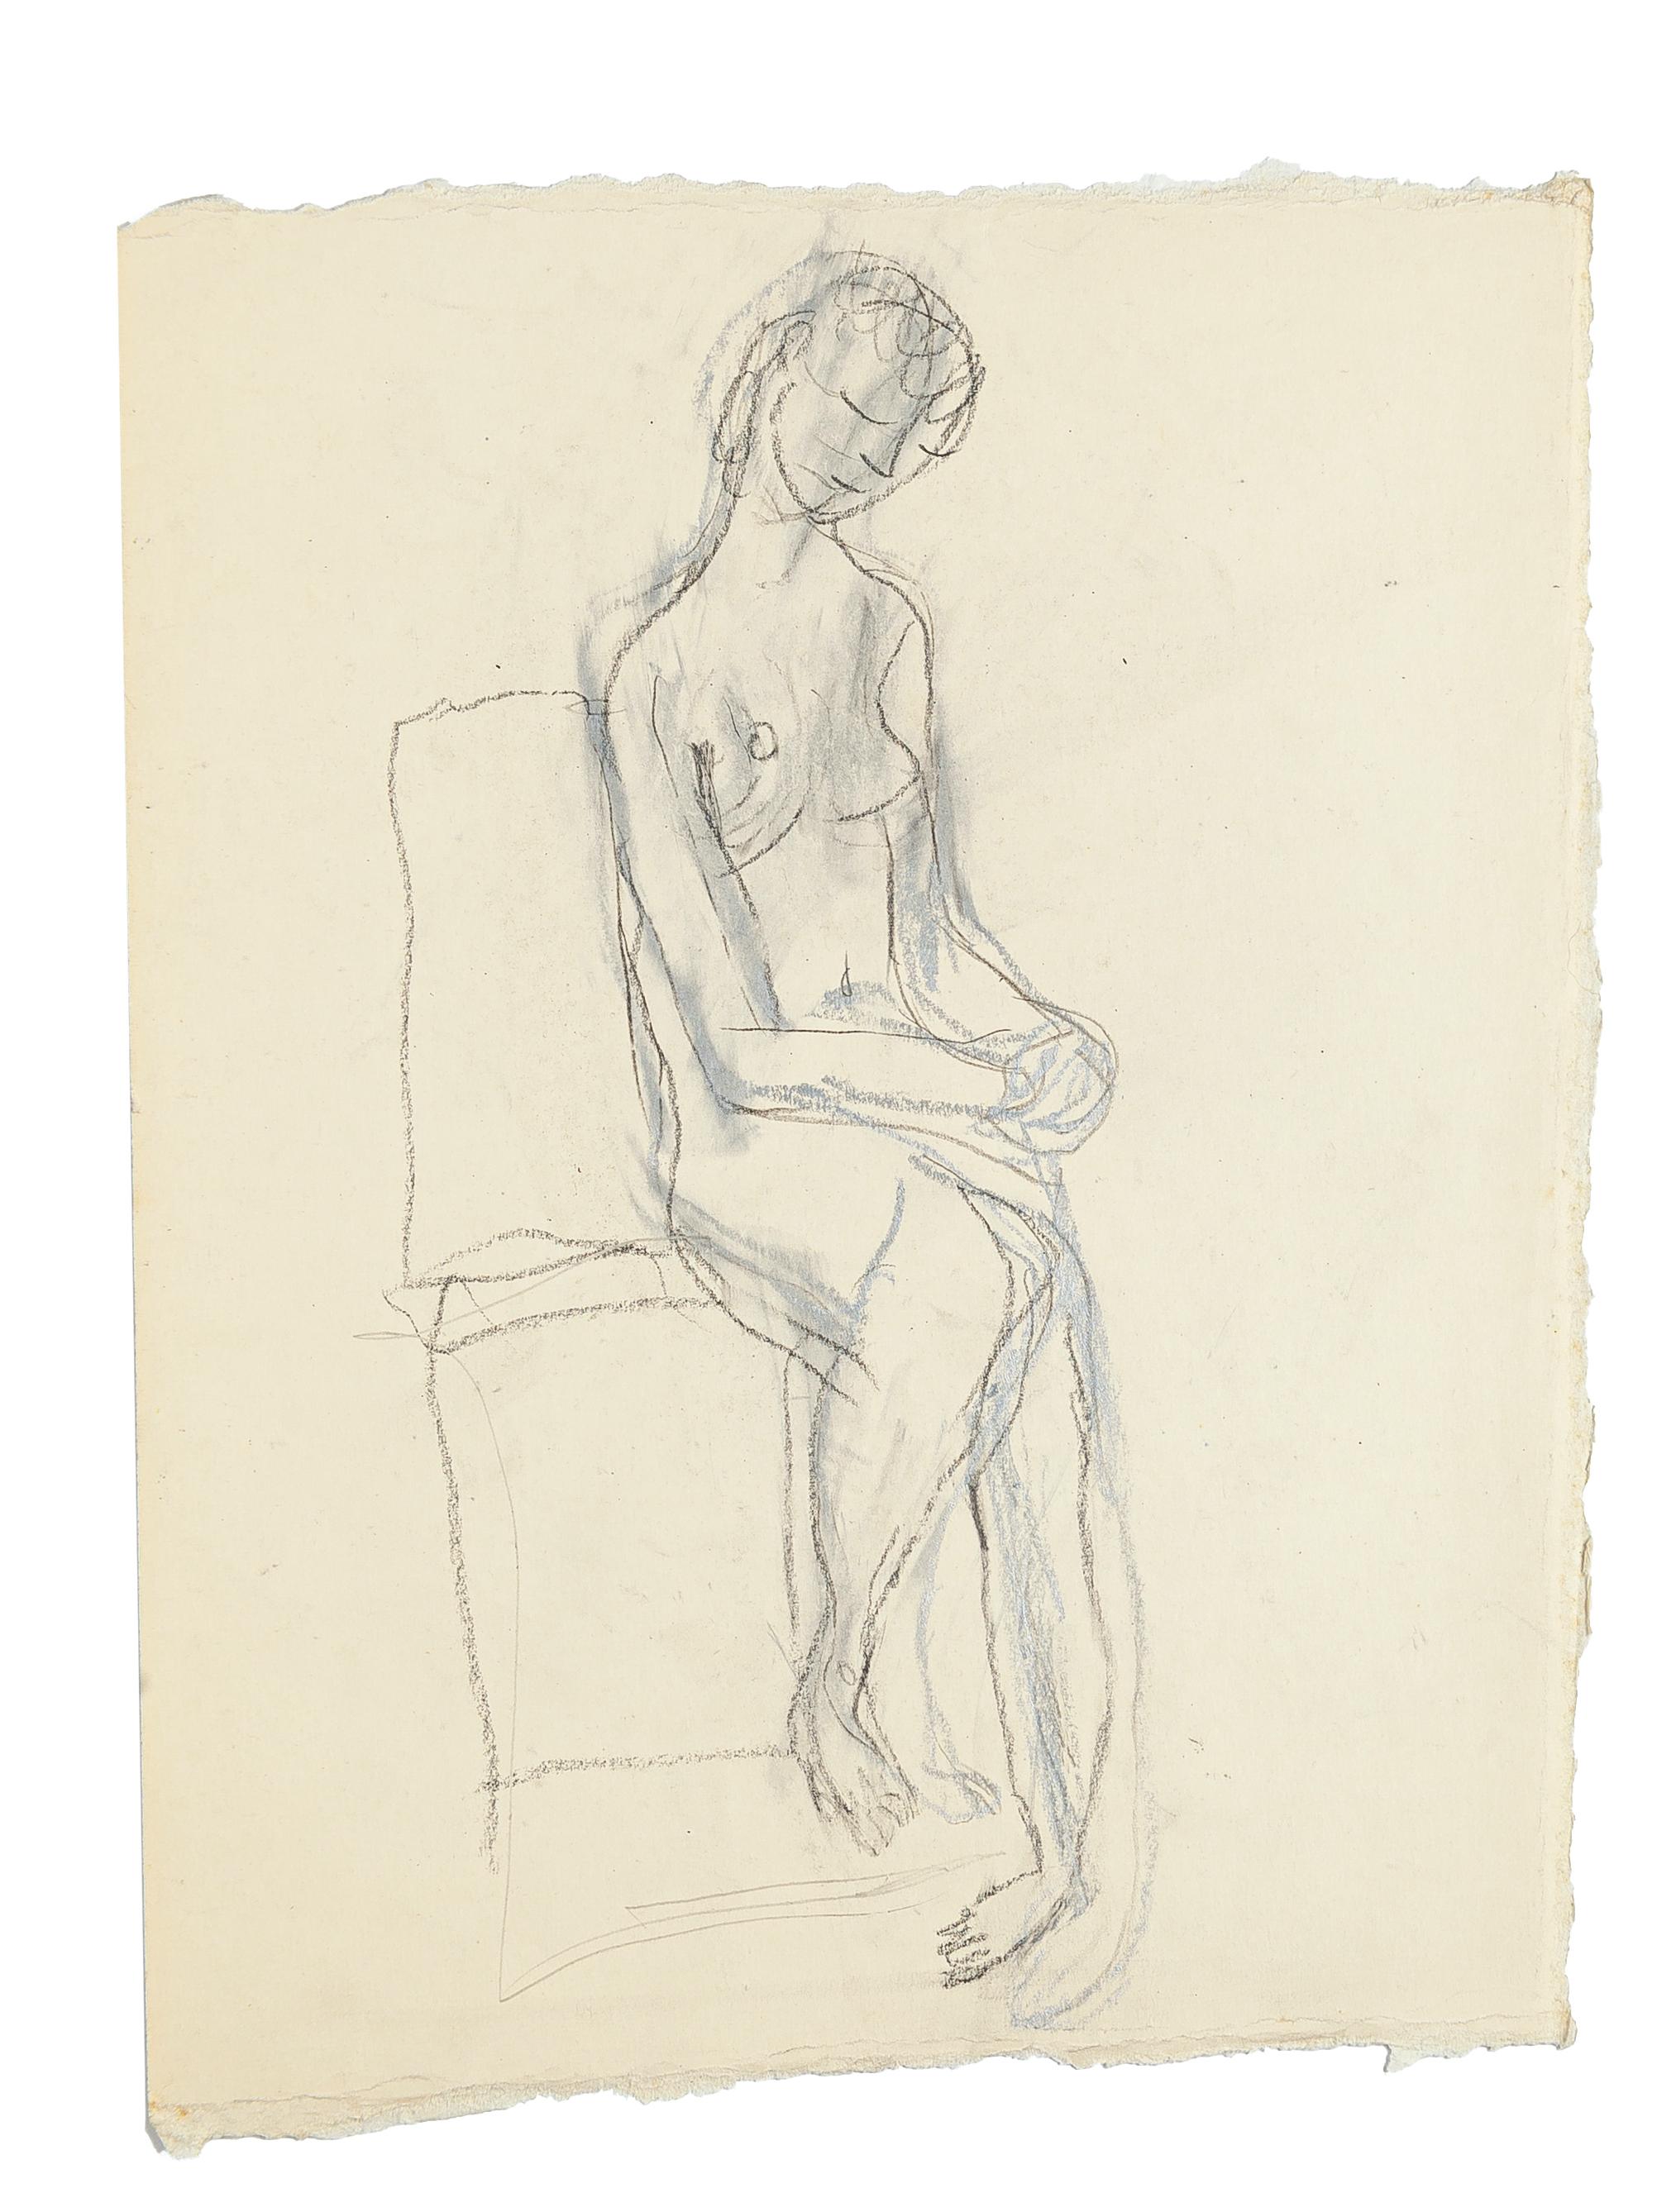 Seated Nude - Original Pencil and Pastel Drawing by Jeanne Daour - 1950s